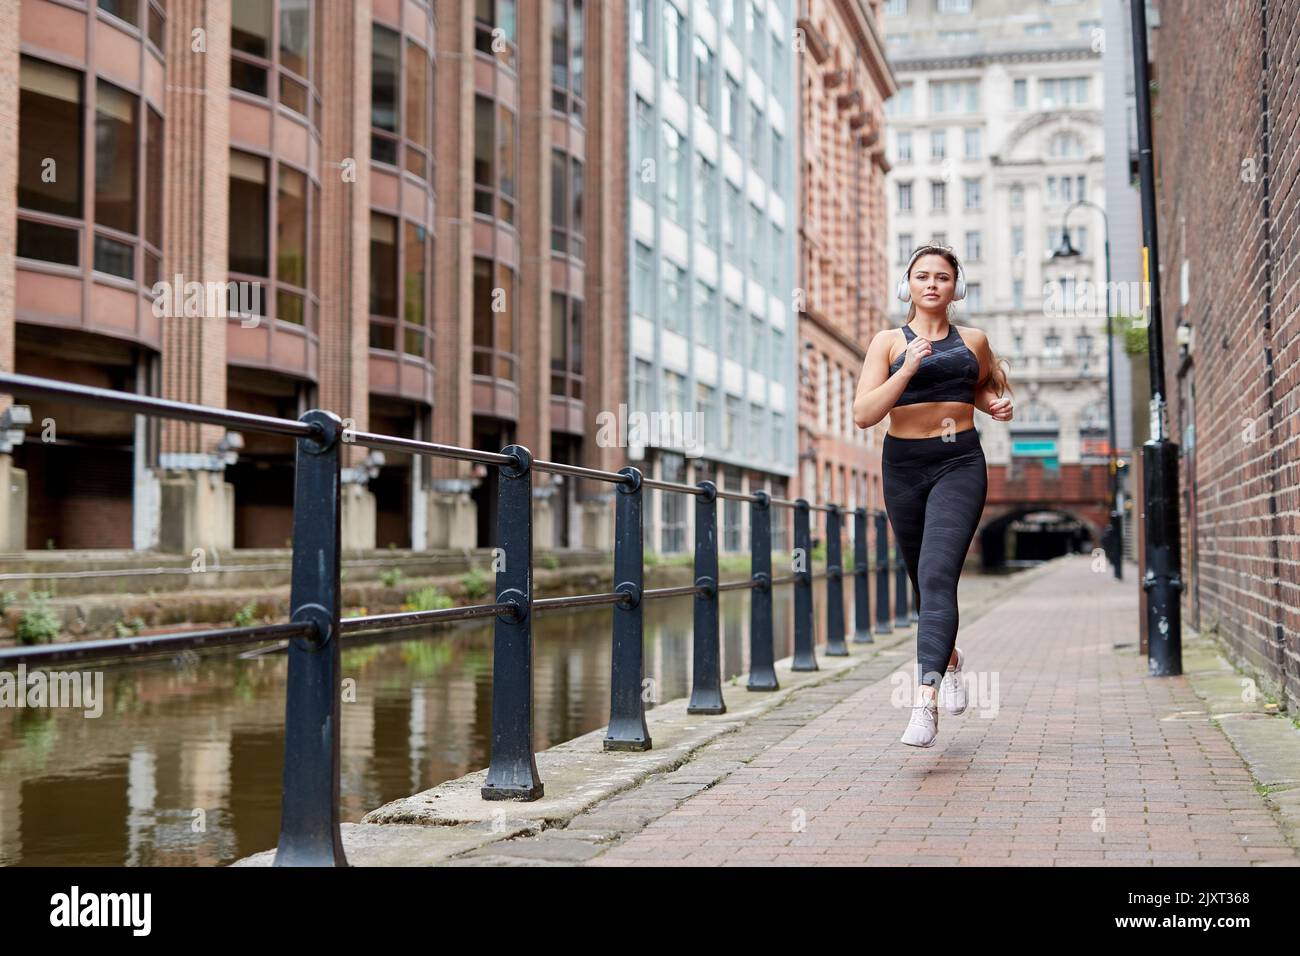 A single female jogger on the streets of Manchester, UK Stock Photo